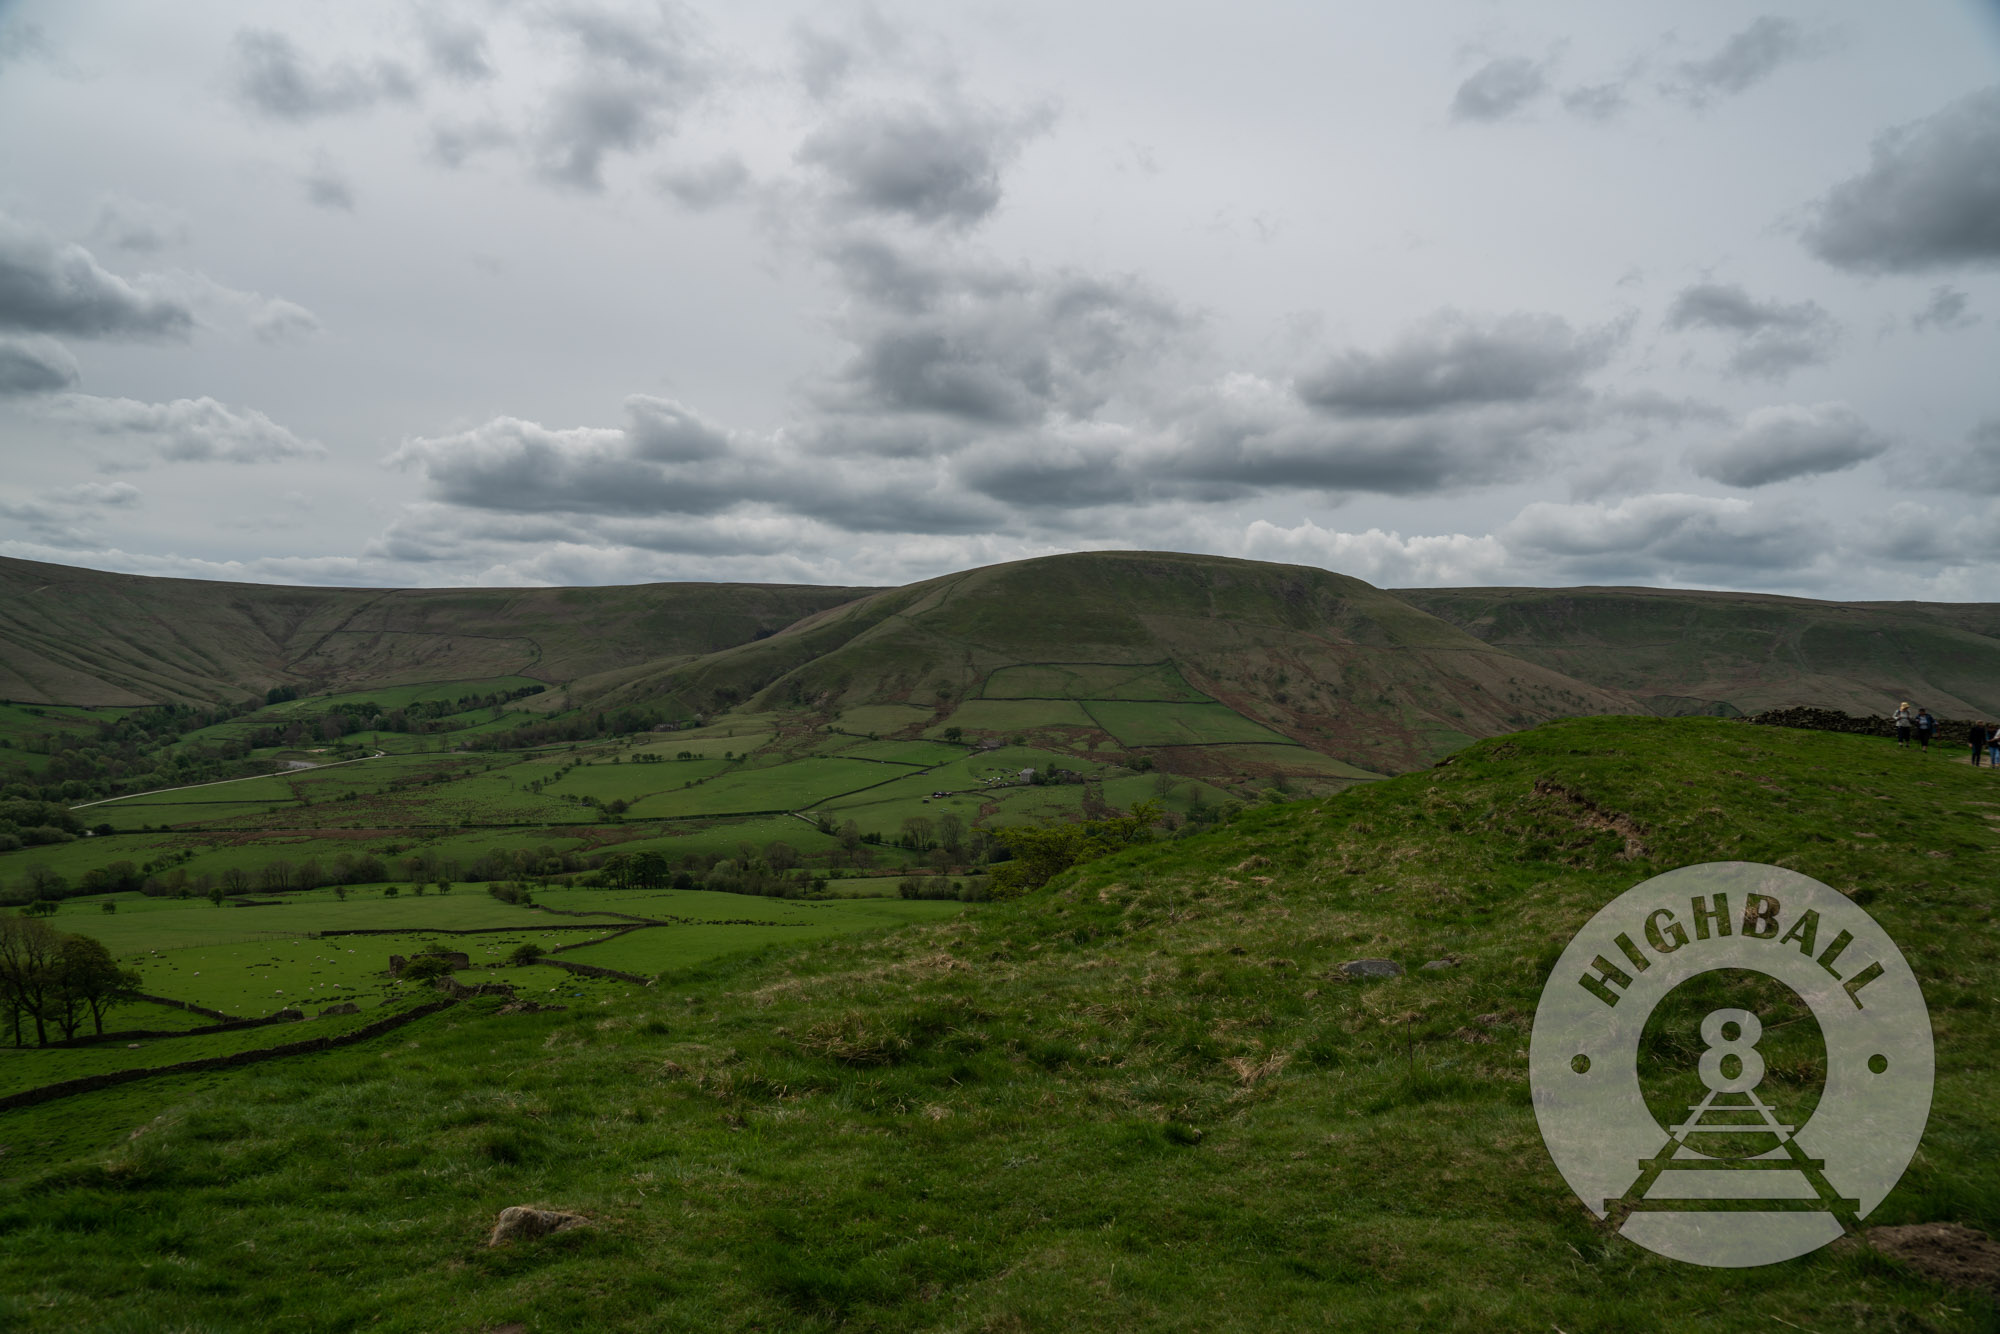 View of the Vale of Edale from the Pennine Way, Peak District, Derbyshire, England, UK, 2018.